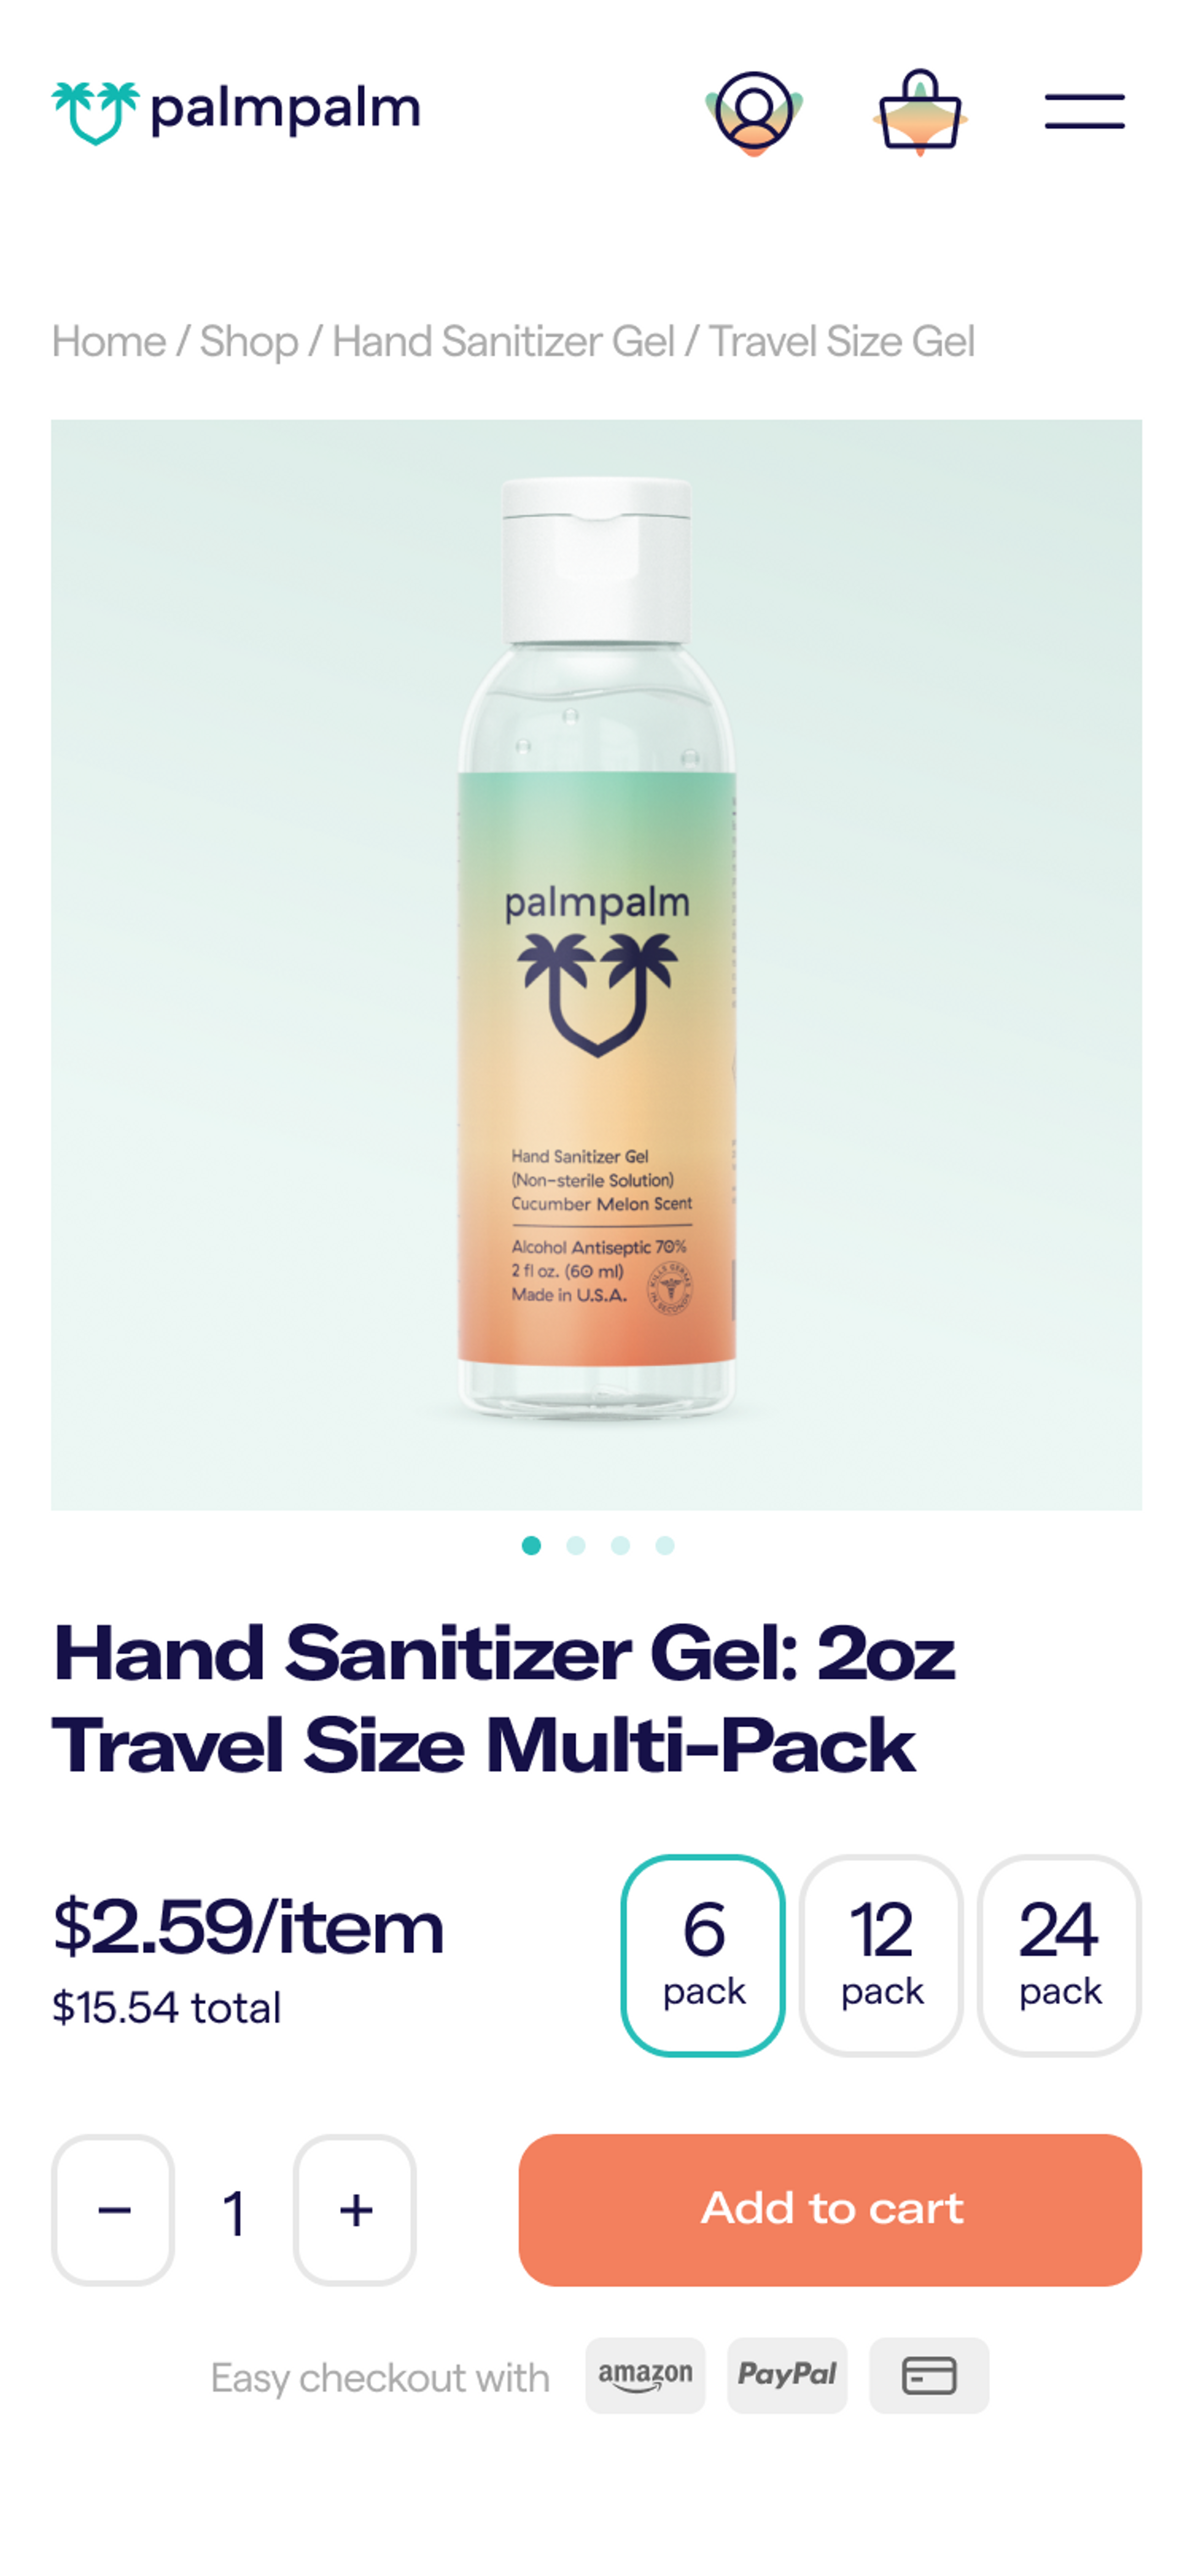 PalmPalm hand sanitizer gel product card optimized for mobile